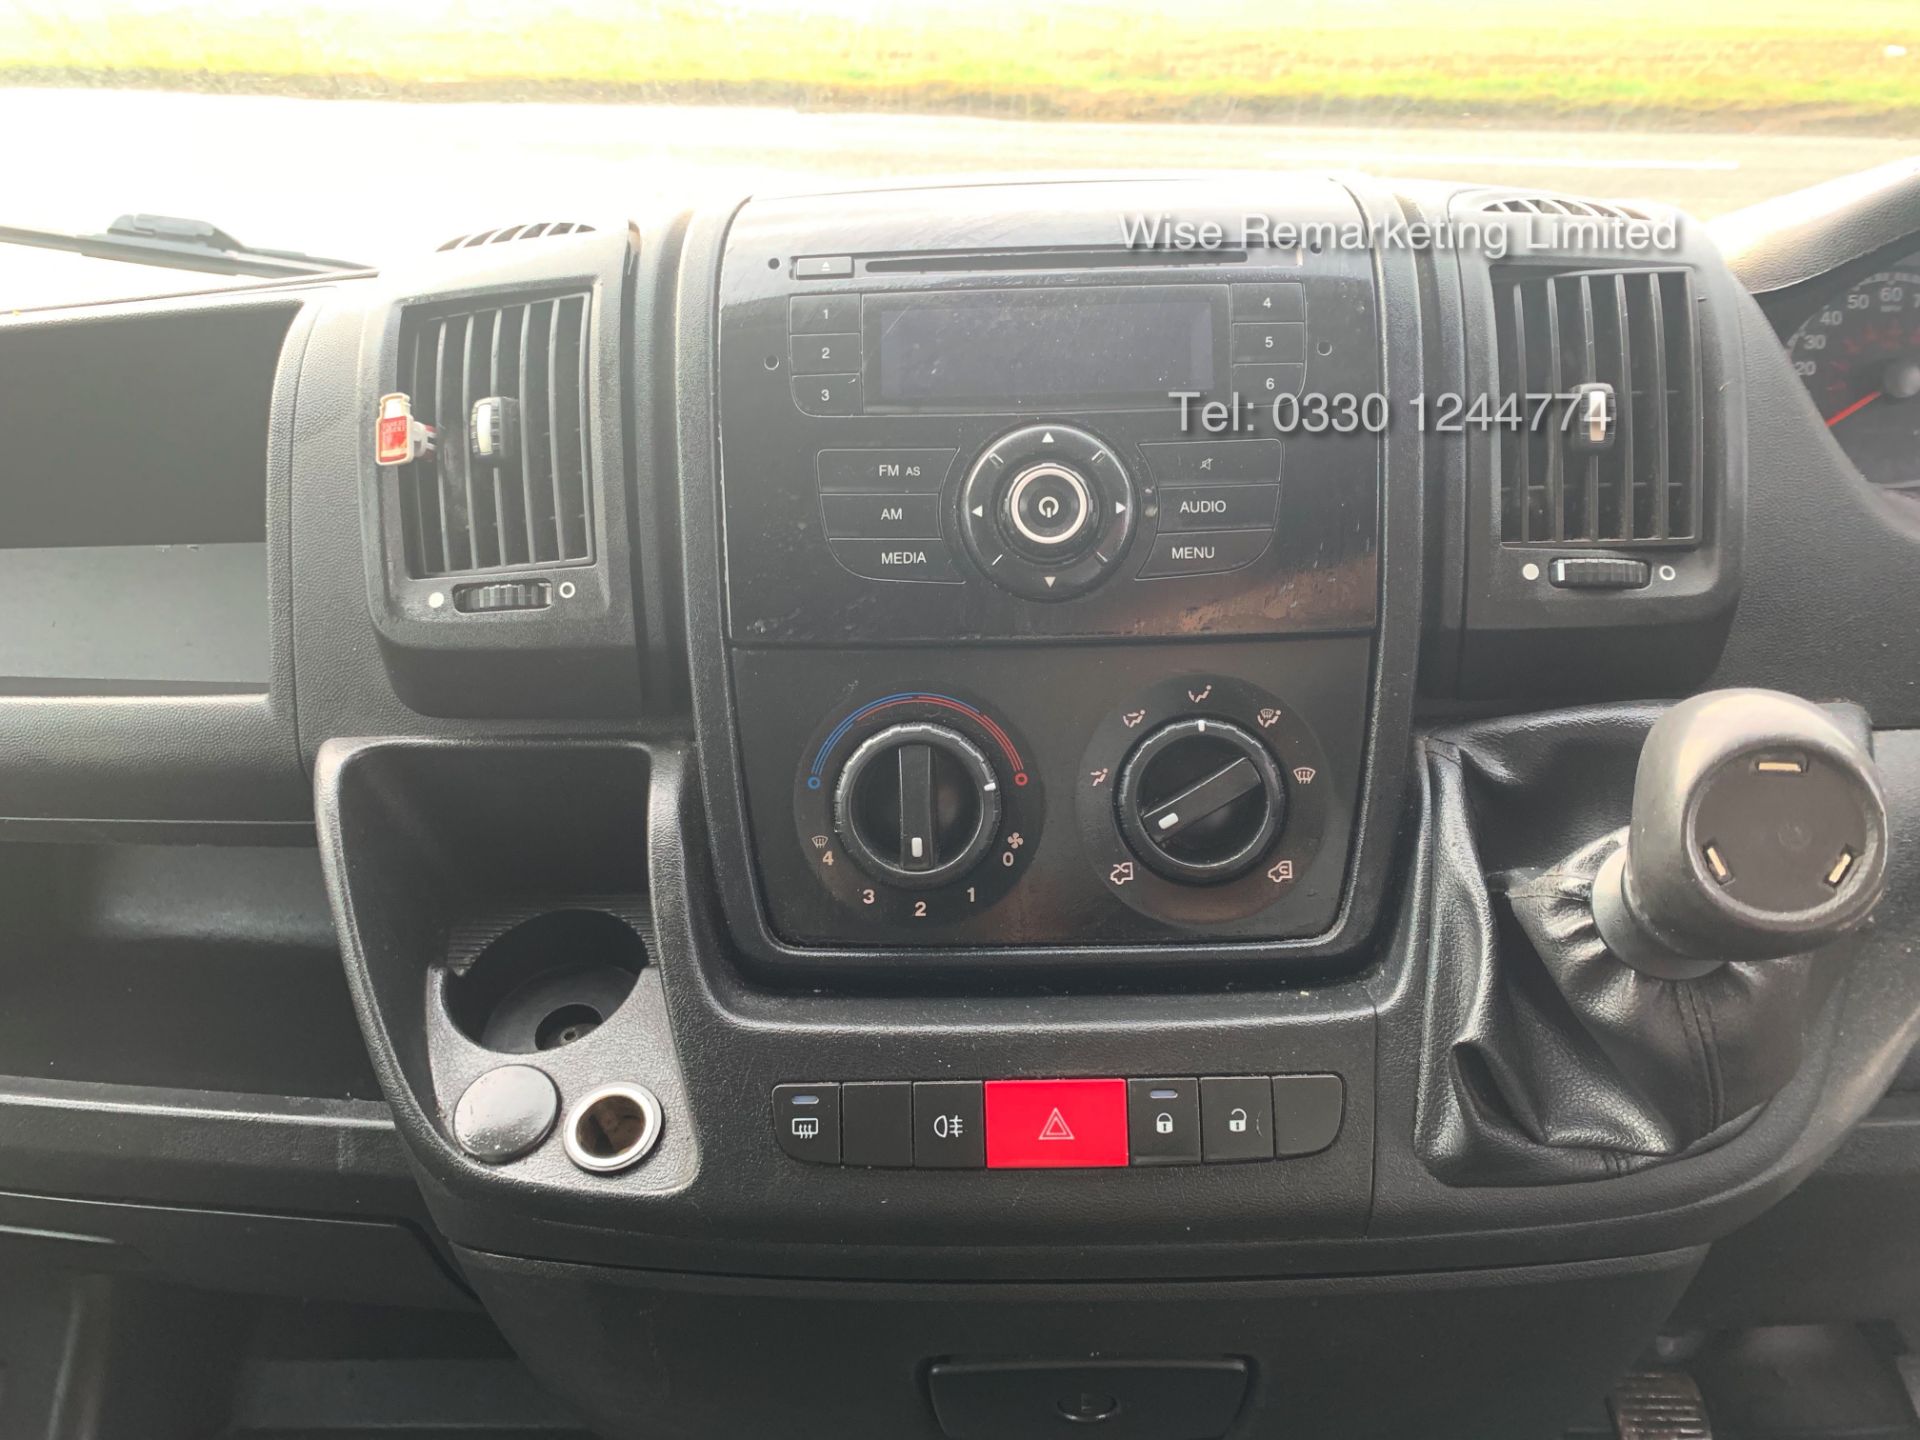 Peugeot Boxer 335 2.2 HDi (L3H2) 2014 Model - 1 Keeper From New - Long Wheel Base - Image 16 of 17